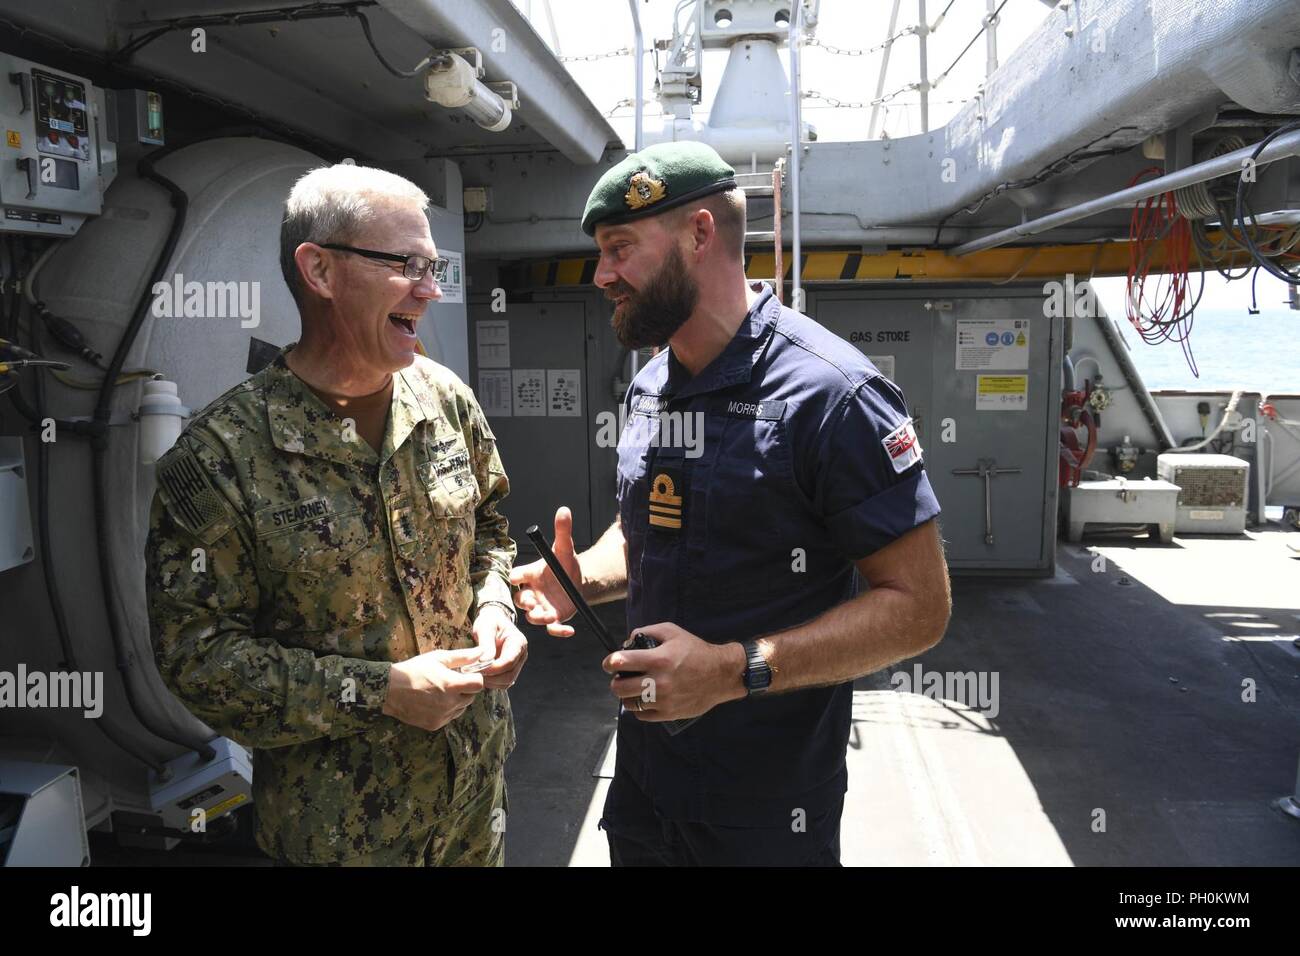 ARABIAN GULF (June 17, 2018) Vice Adm. Scott Stearney, commander of U.S. Naval Forces Central Command, U.S. 5th Fleet, Combined Maritime Forces, left, speaks with Lt. Commander Daniel Morris, aboard HMS Middleton during Mine Countermeasures Exercise (MCMEX) 18-2. The bilateral exercise enhances cooperation, mutual MCM capabilities and interoperability between the U.S. and U.K., demonstrating the shared commitment of ensuring unfettered operations of naval and support vessels, as well as commercial shipping movements, throughout the maritime domain. Stock Photo